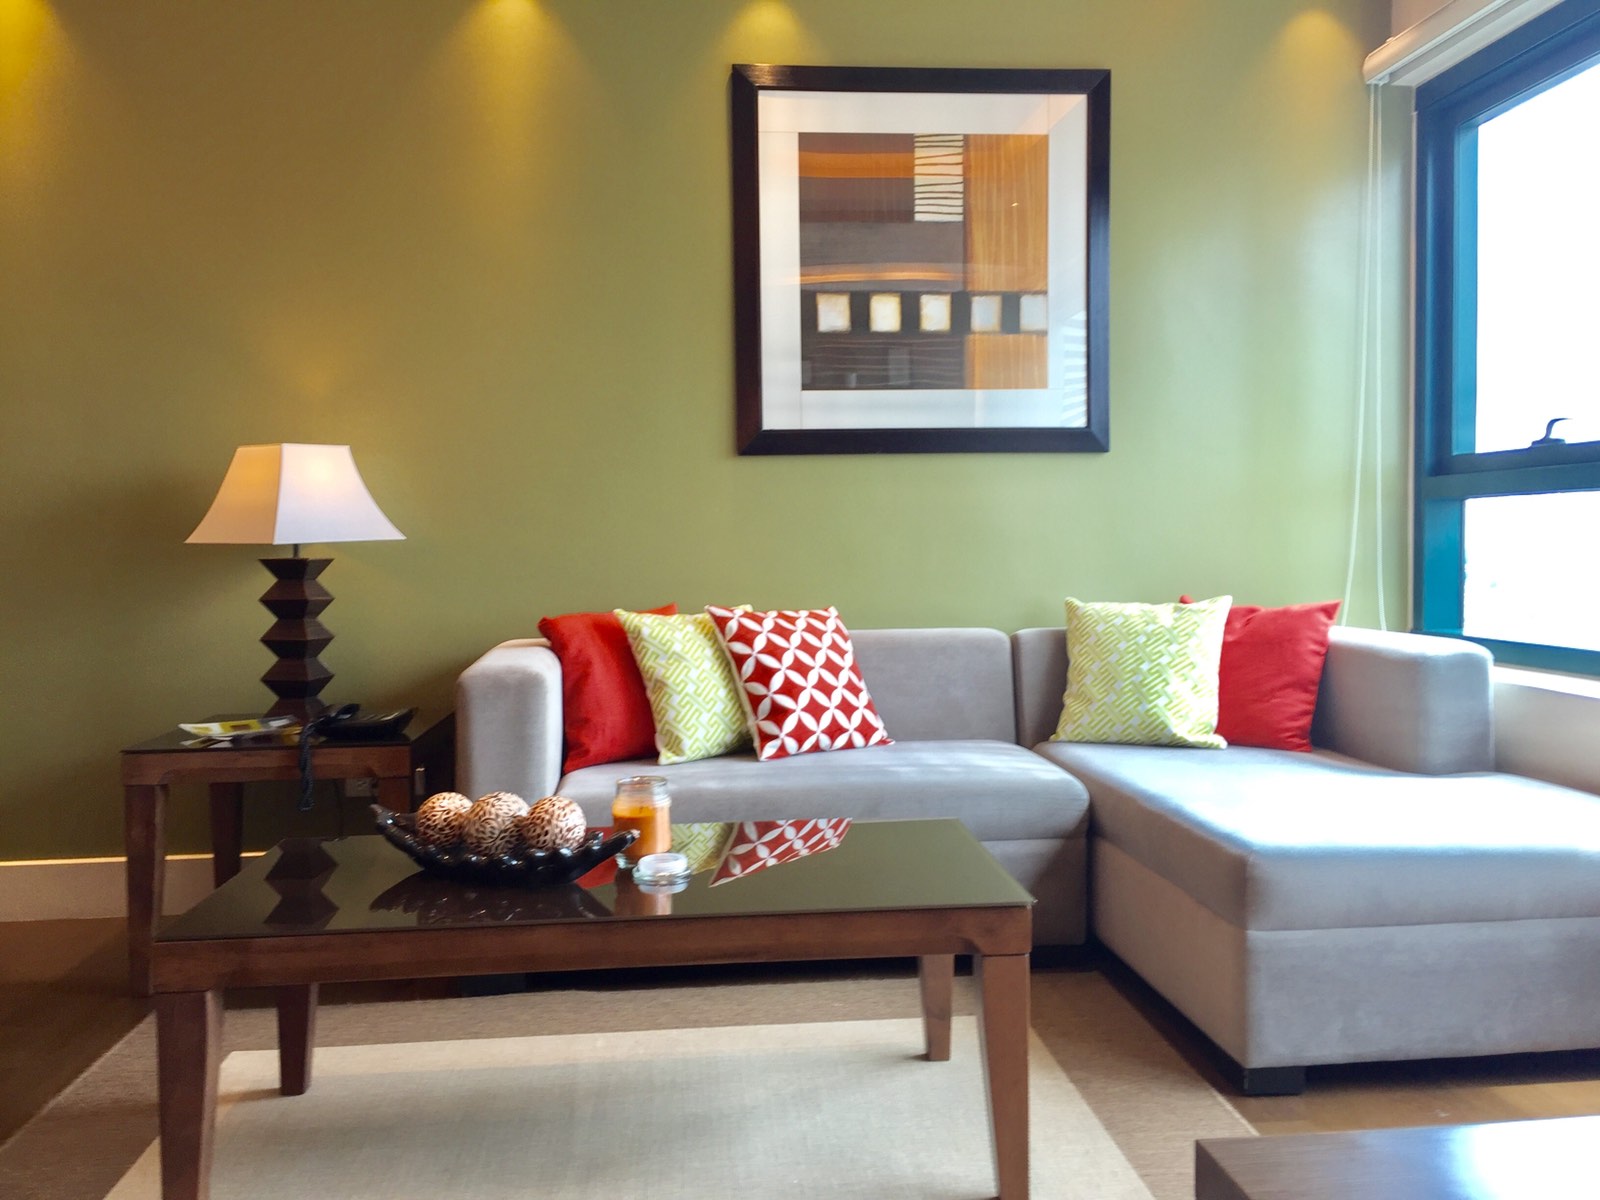 1 Bedroom Condominium For Lease is Located at Edades Tower Rockwell Makati